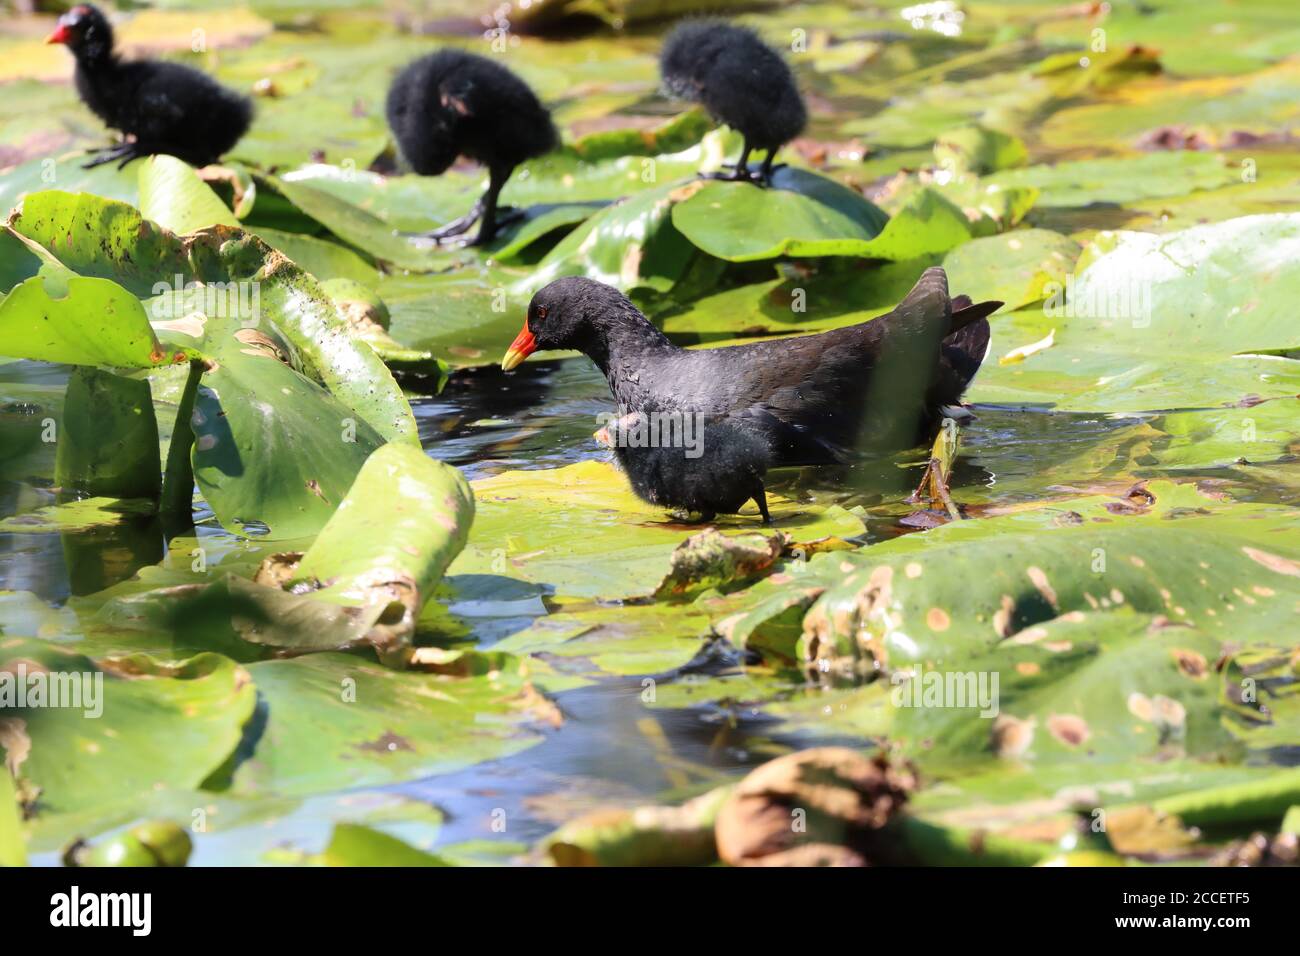 Moorhen with its chicks walking on Lilly pads in a pond, County Durham, England, UK Stock Photo